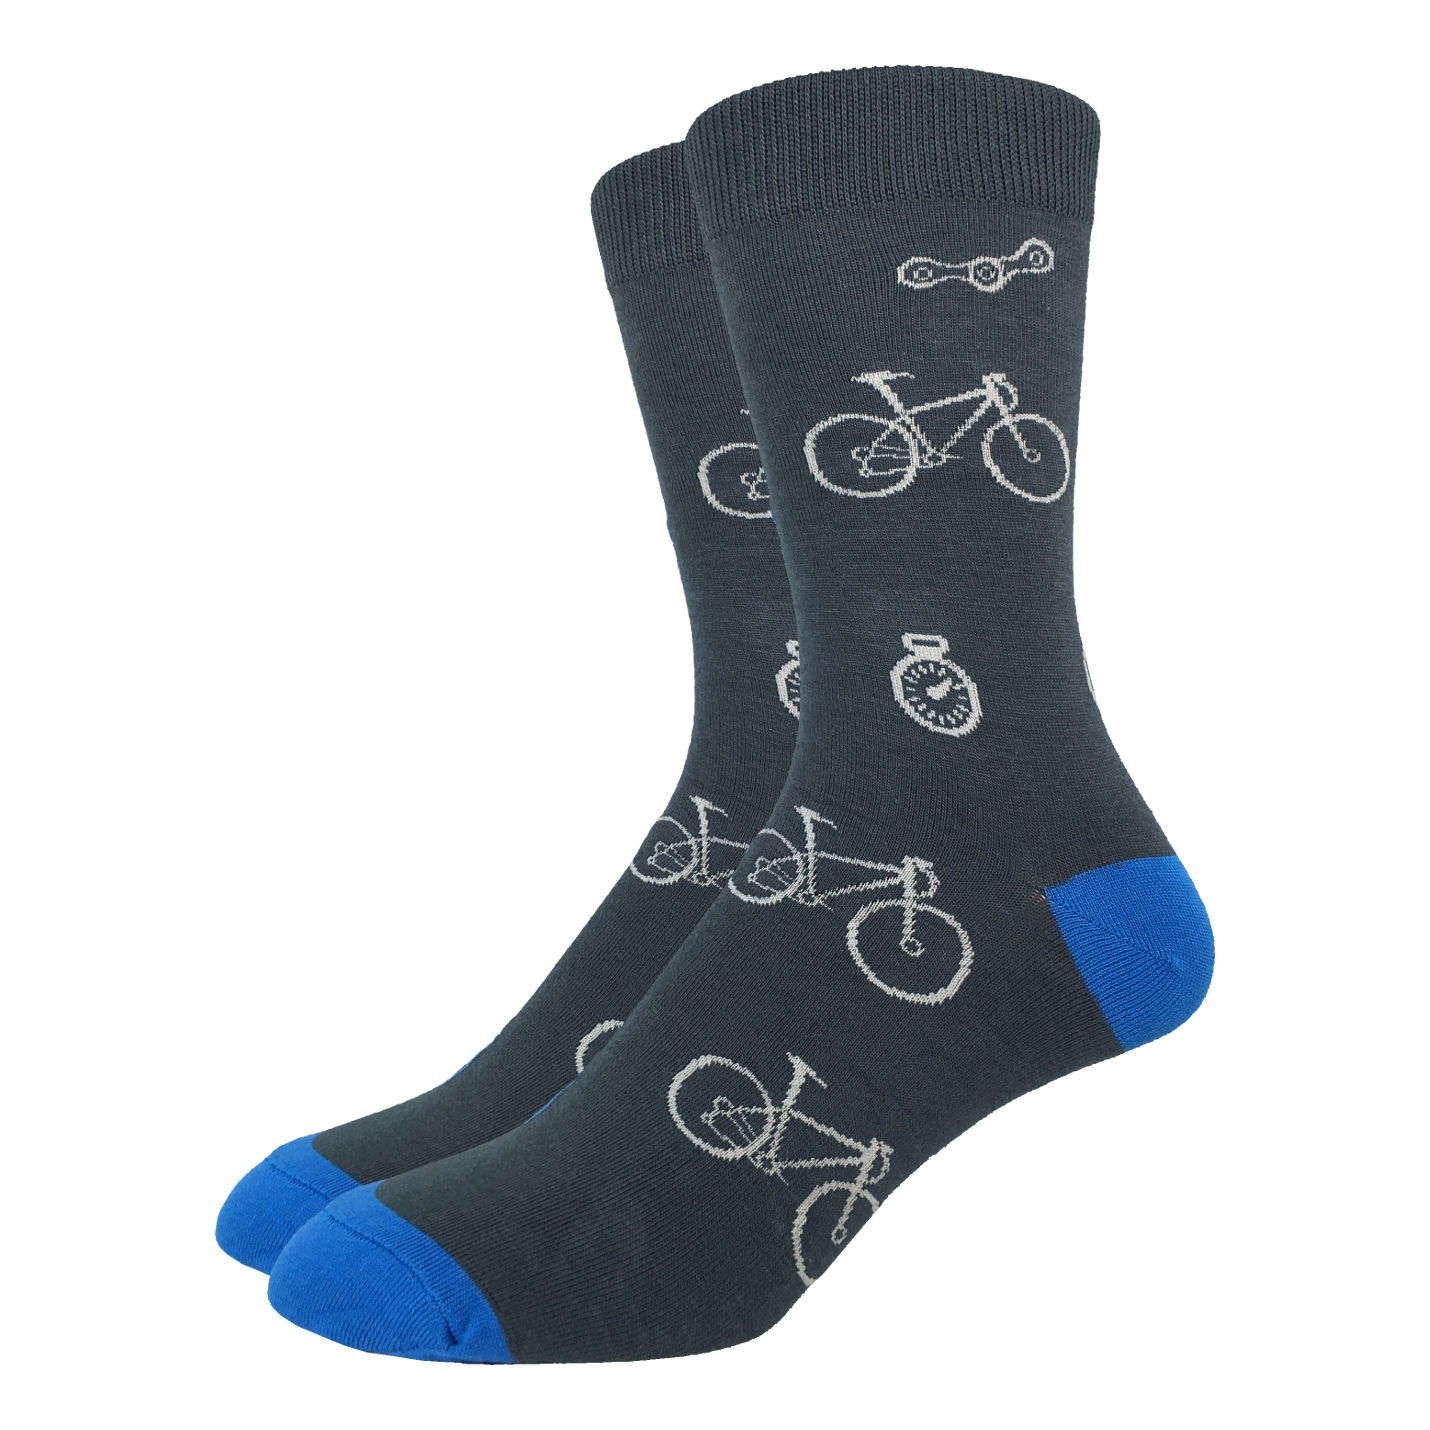 Good Luck Sock - Grey & Blue Bicycles